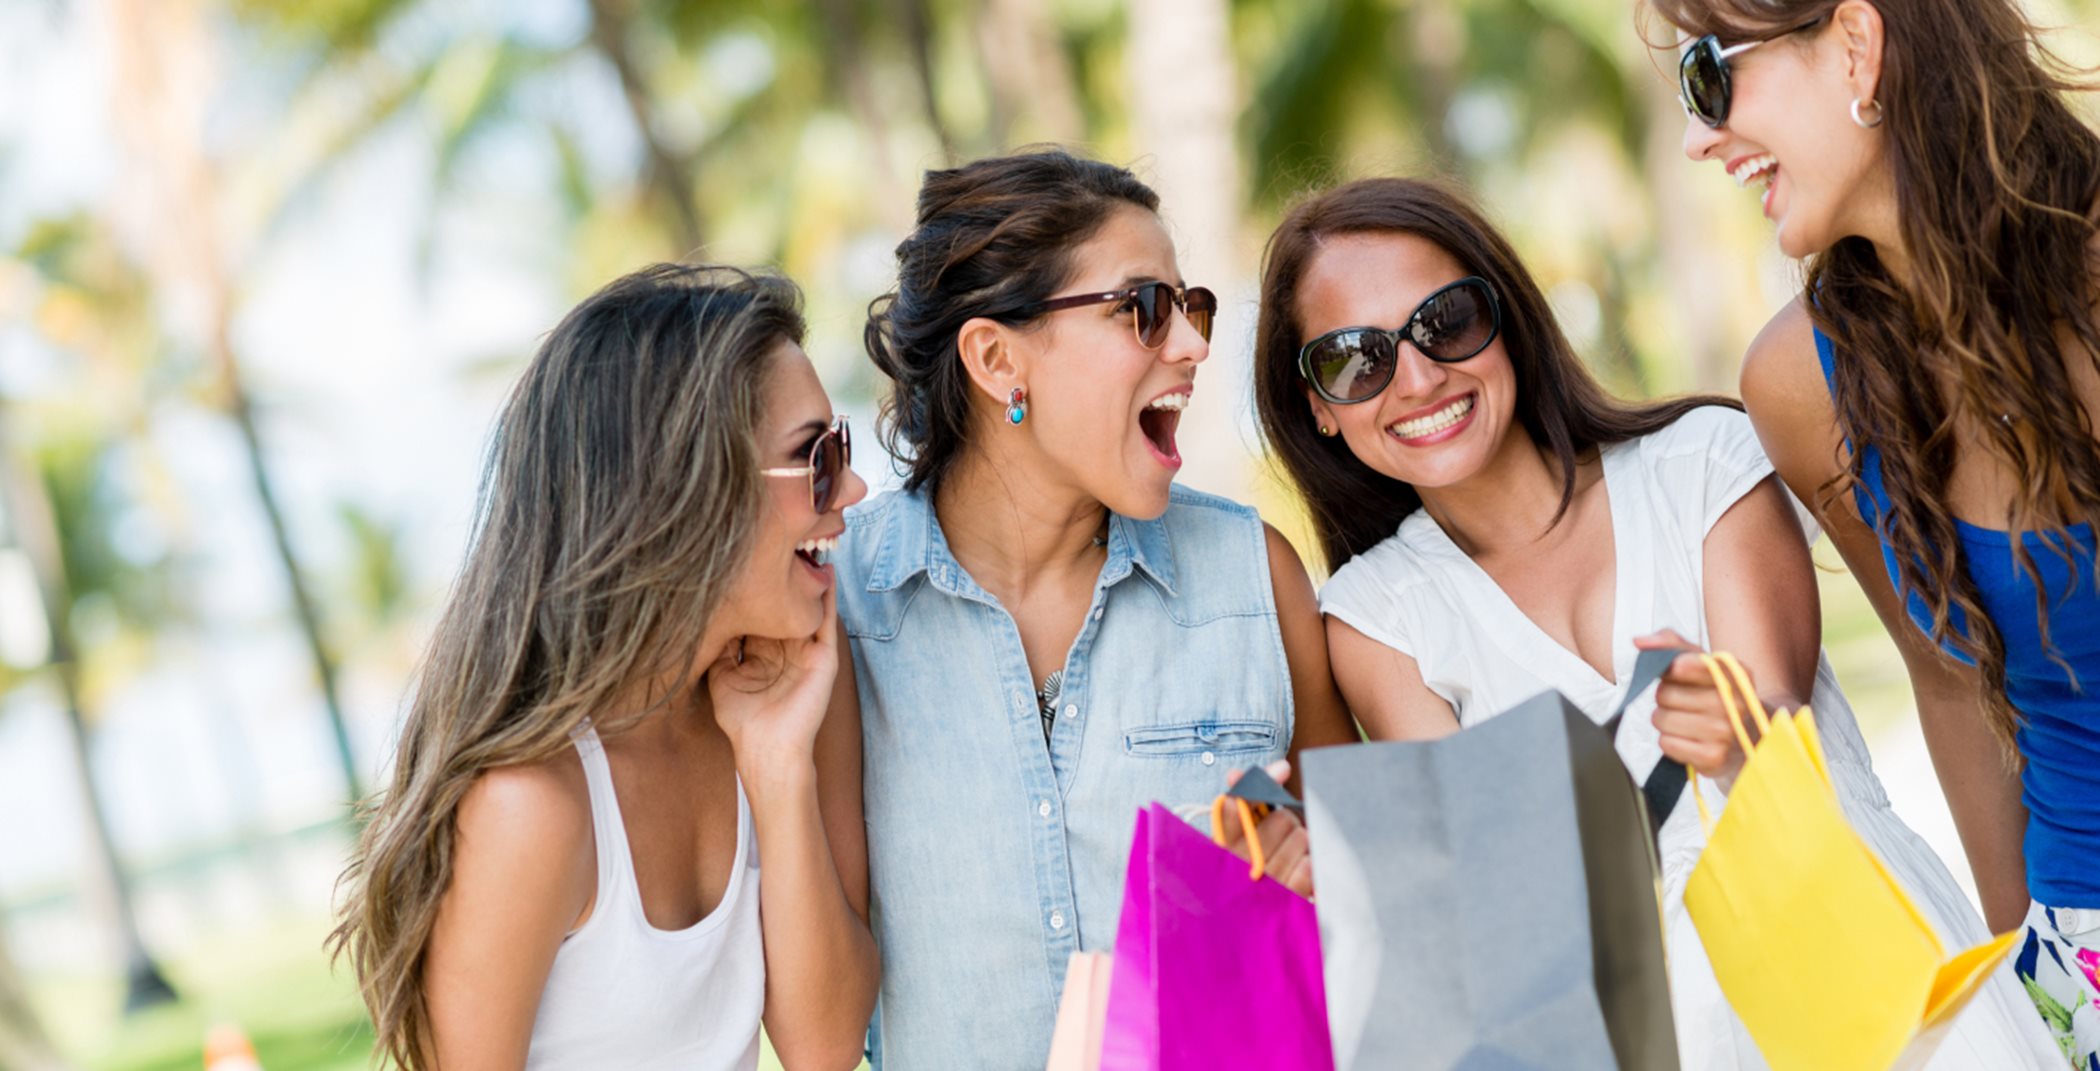 Friends laughing and shopping